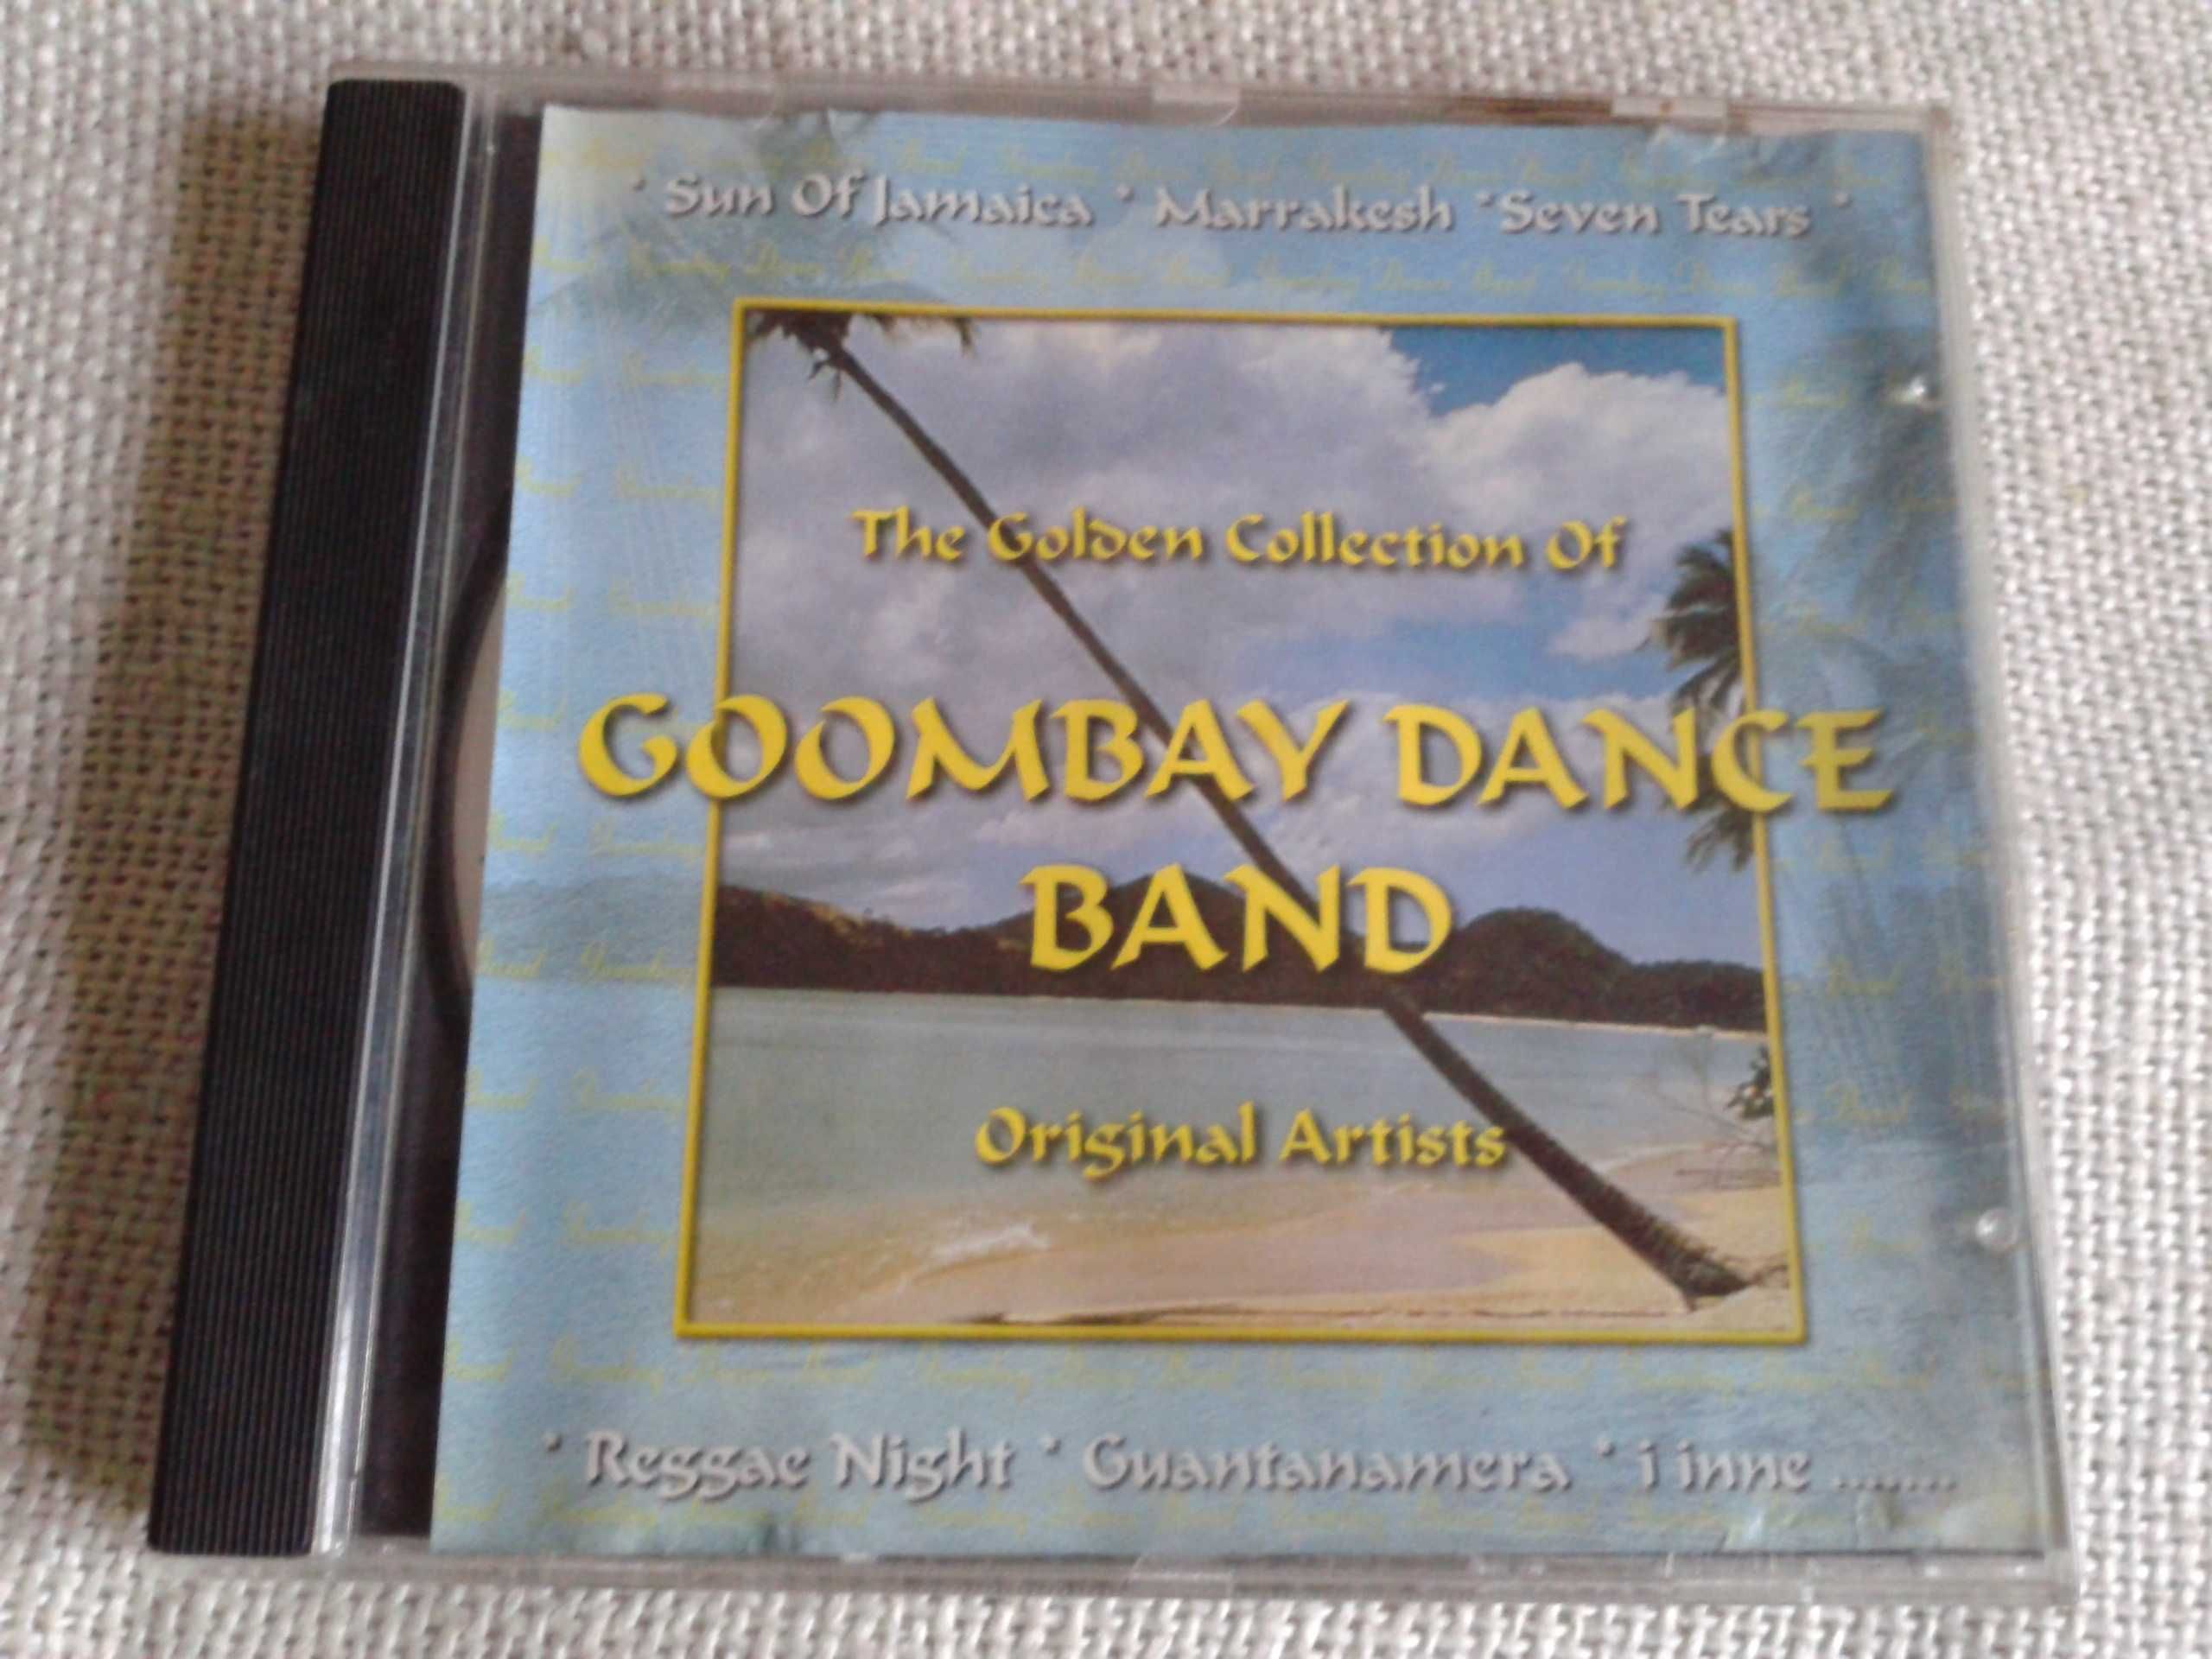 Goombay Dance Band – The Golden Collection  CD